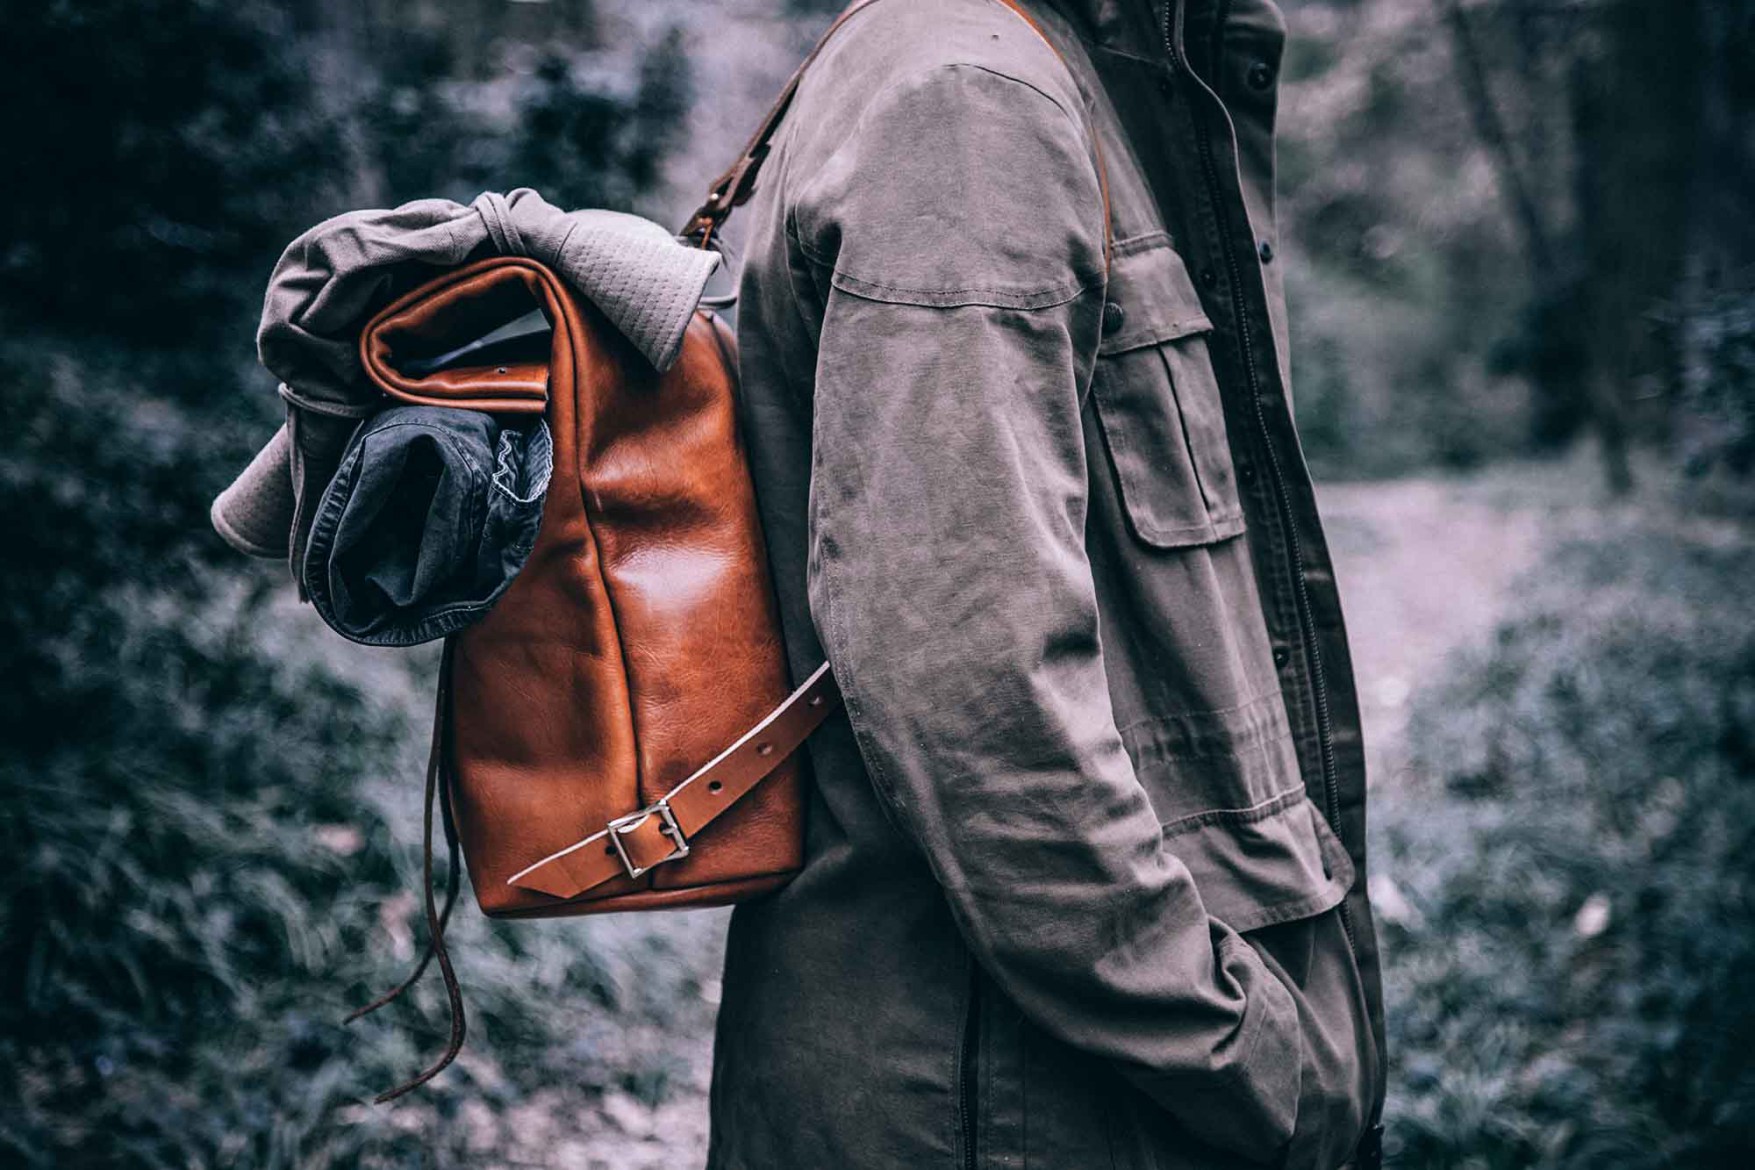 mifland-introduces-the-rolltop-rucksack-with-a-lookbook-shot-by-ta-ku-2